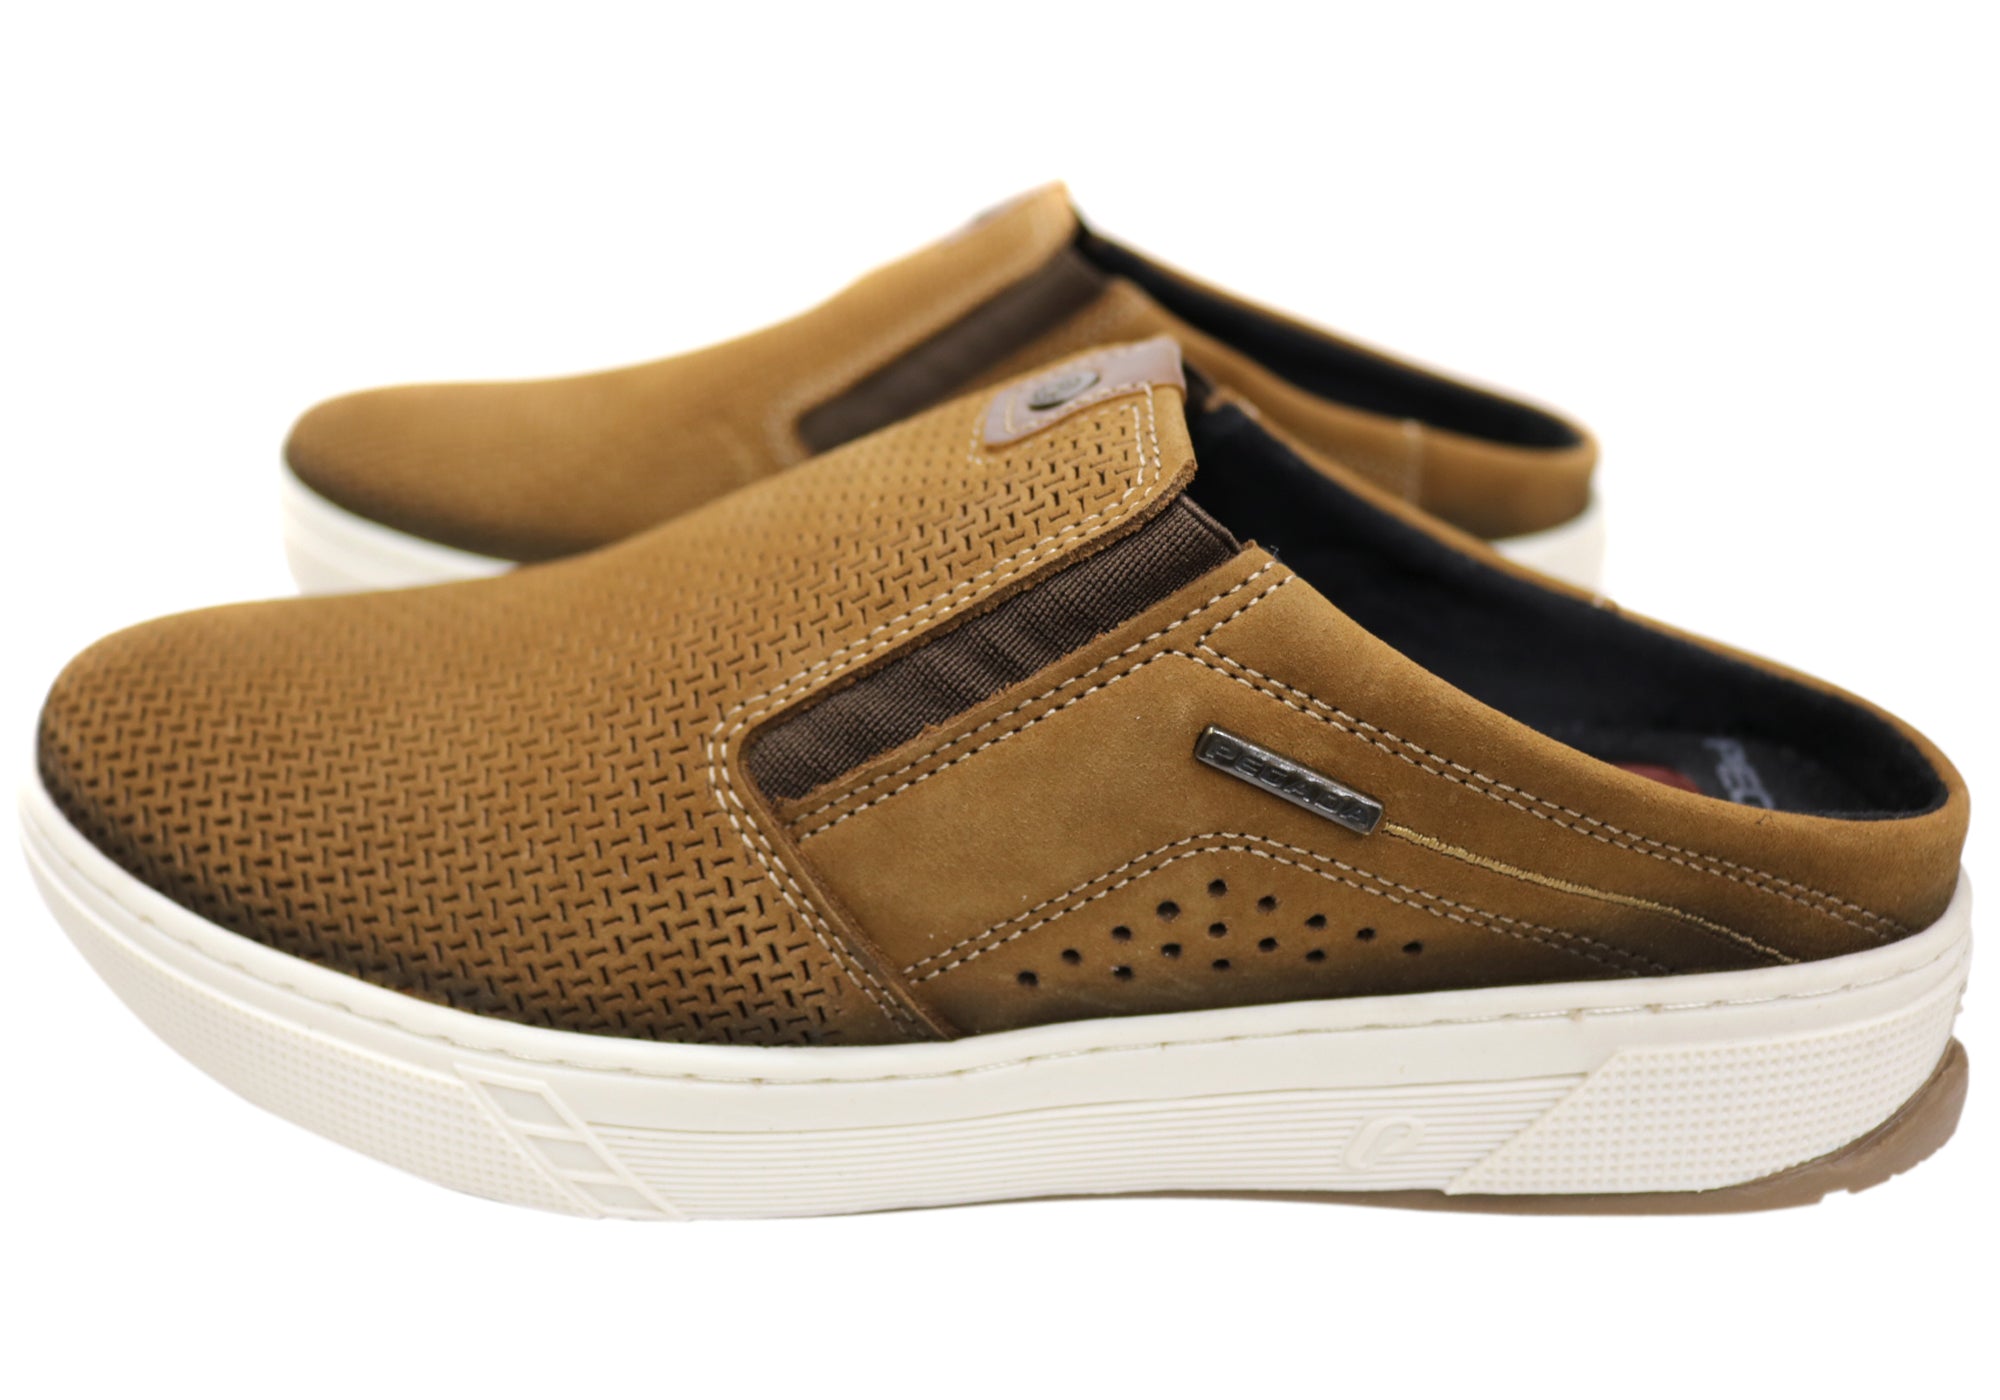 mens leather slip on shoes casual